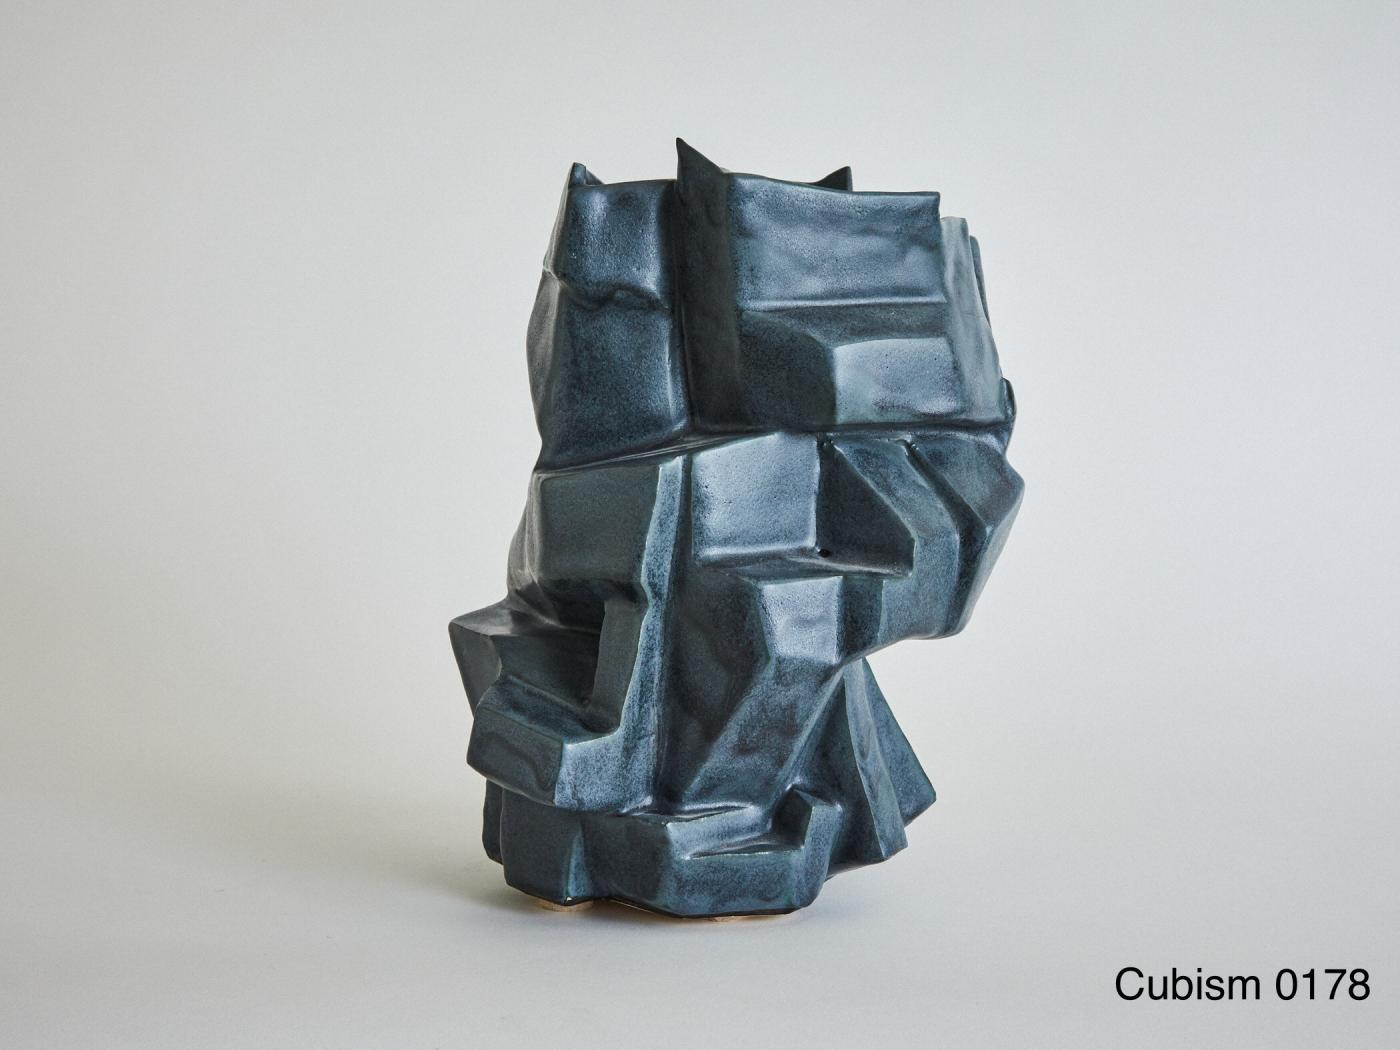 Wheel-thrown and manipulated cubist vessel in white stoneware.